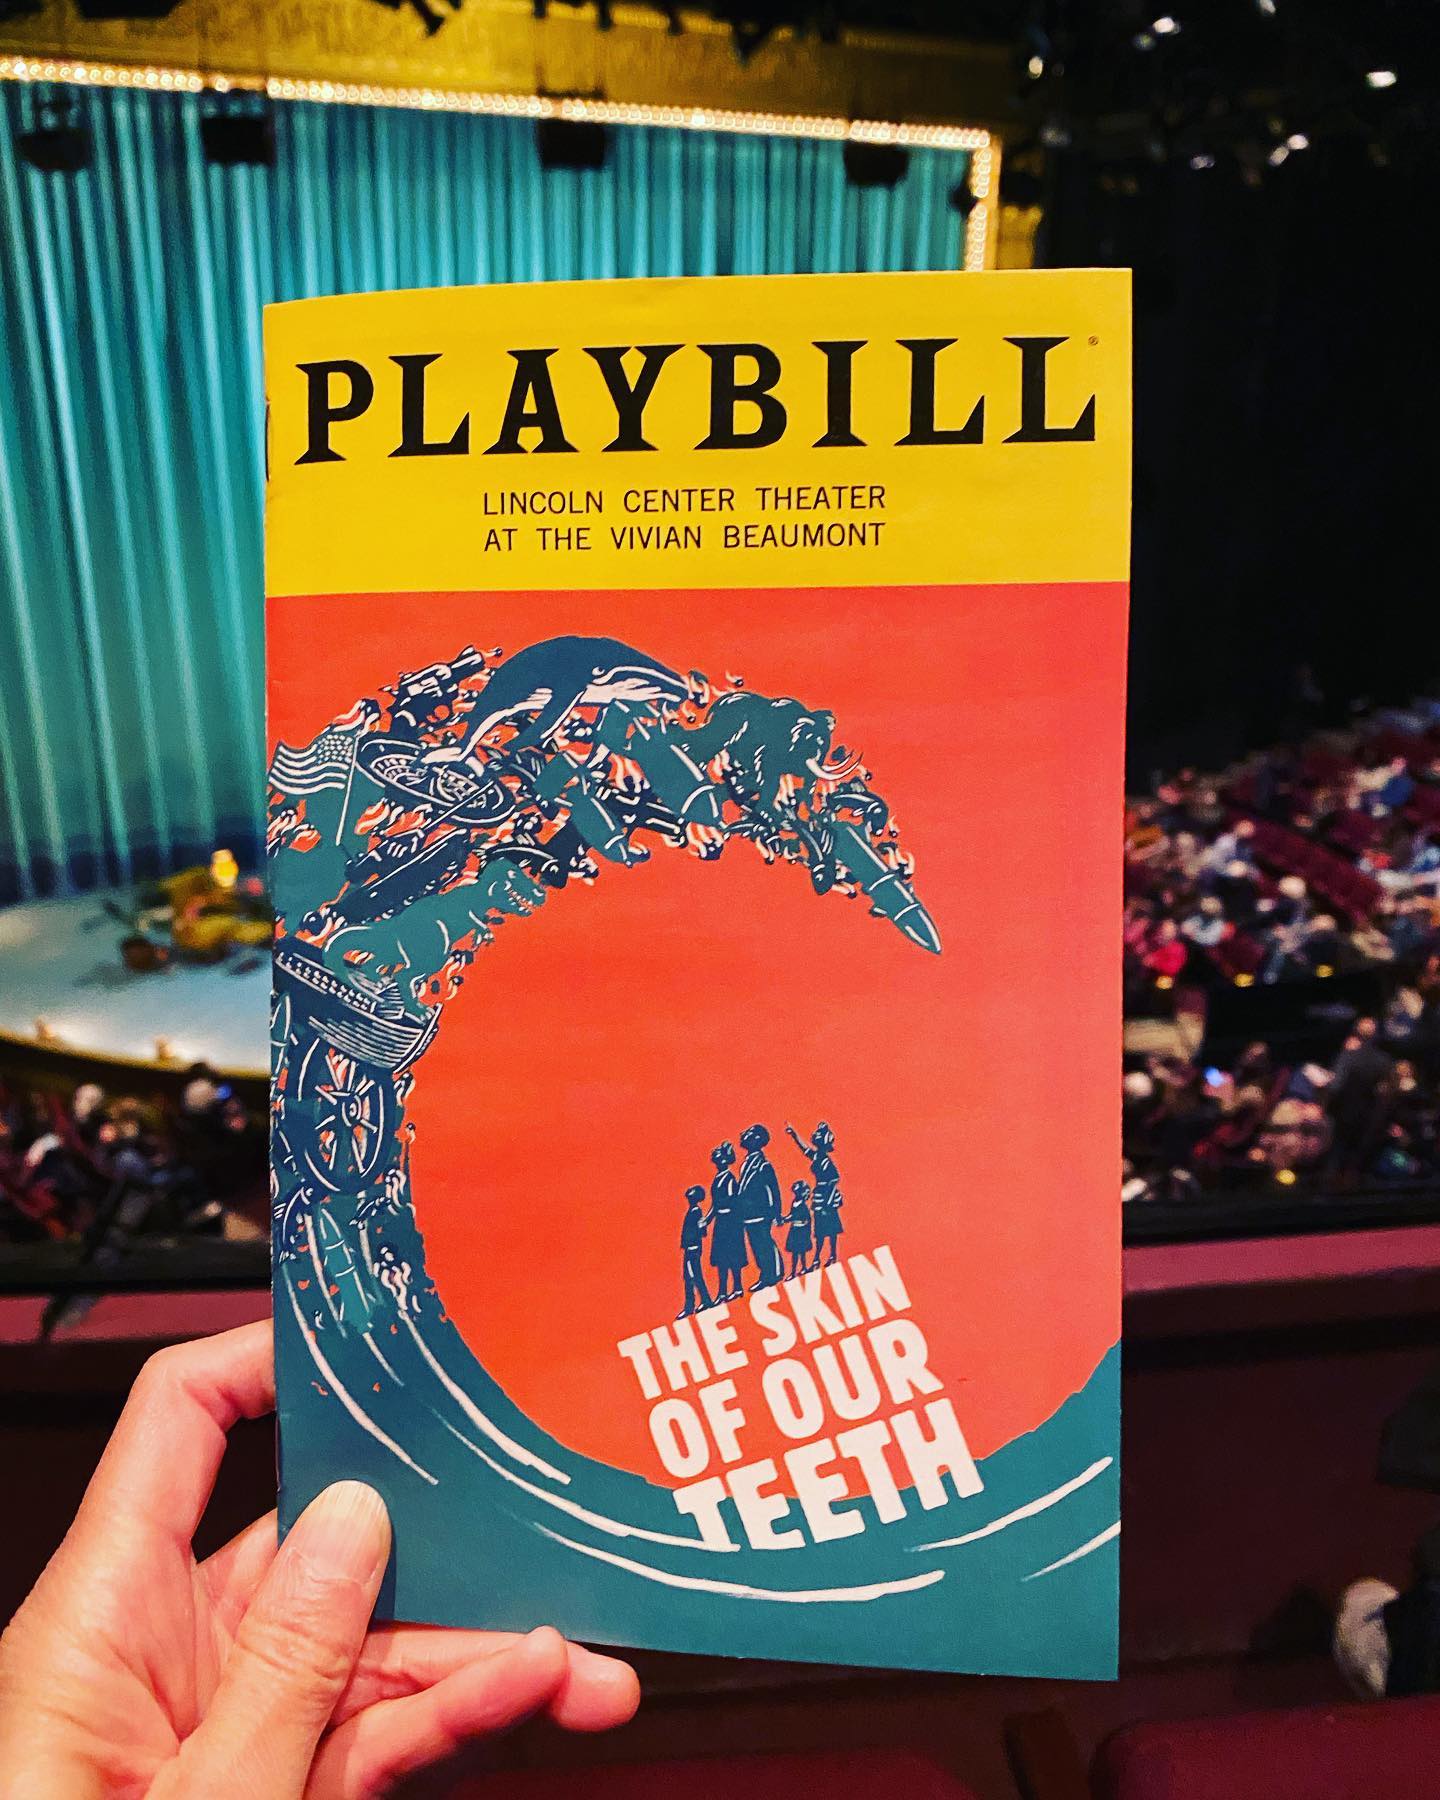 This spectacular (literally!) production  of The Skin of Our Teeth @lctheater and helmed by @lileanablaincruzofficial is a wild ride and I was totally into it! A visual feast, I never knew what was going to happen next, I couldn’t even begin to guess. What a gift #thorntonwilder gave us for the ages. @gabybeans gives one of my favorite performances of the season thus far, especially in Act 1.  It’s surreal, fourth-wall breaking, absurdist goodness. #theskinofourteeth #lincolncenter #vivianbeaumonttheater #broadwayplay #broadwayrevival #theatre #theater #broadway